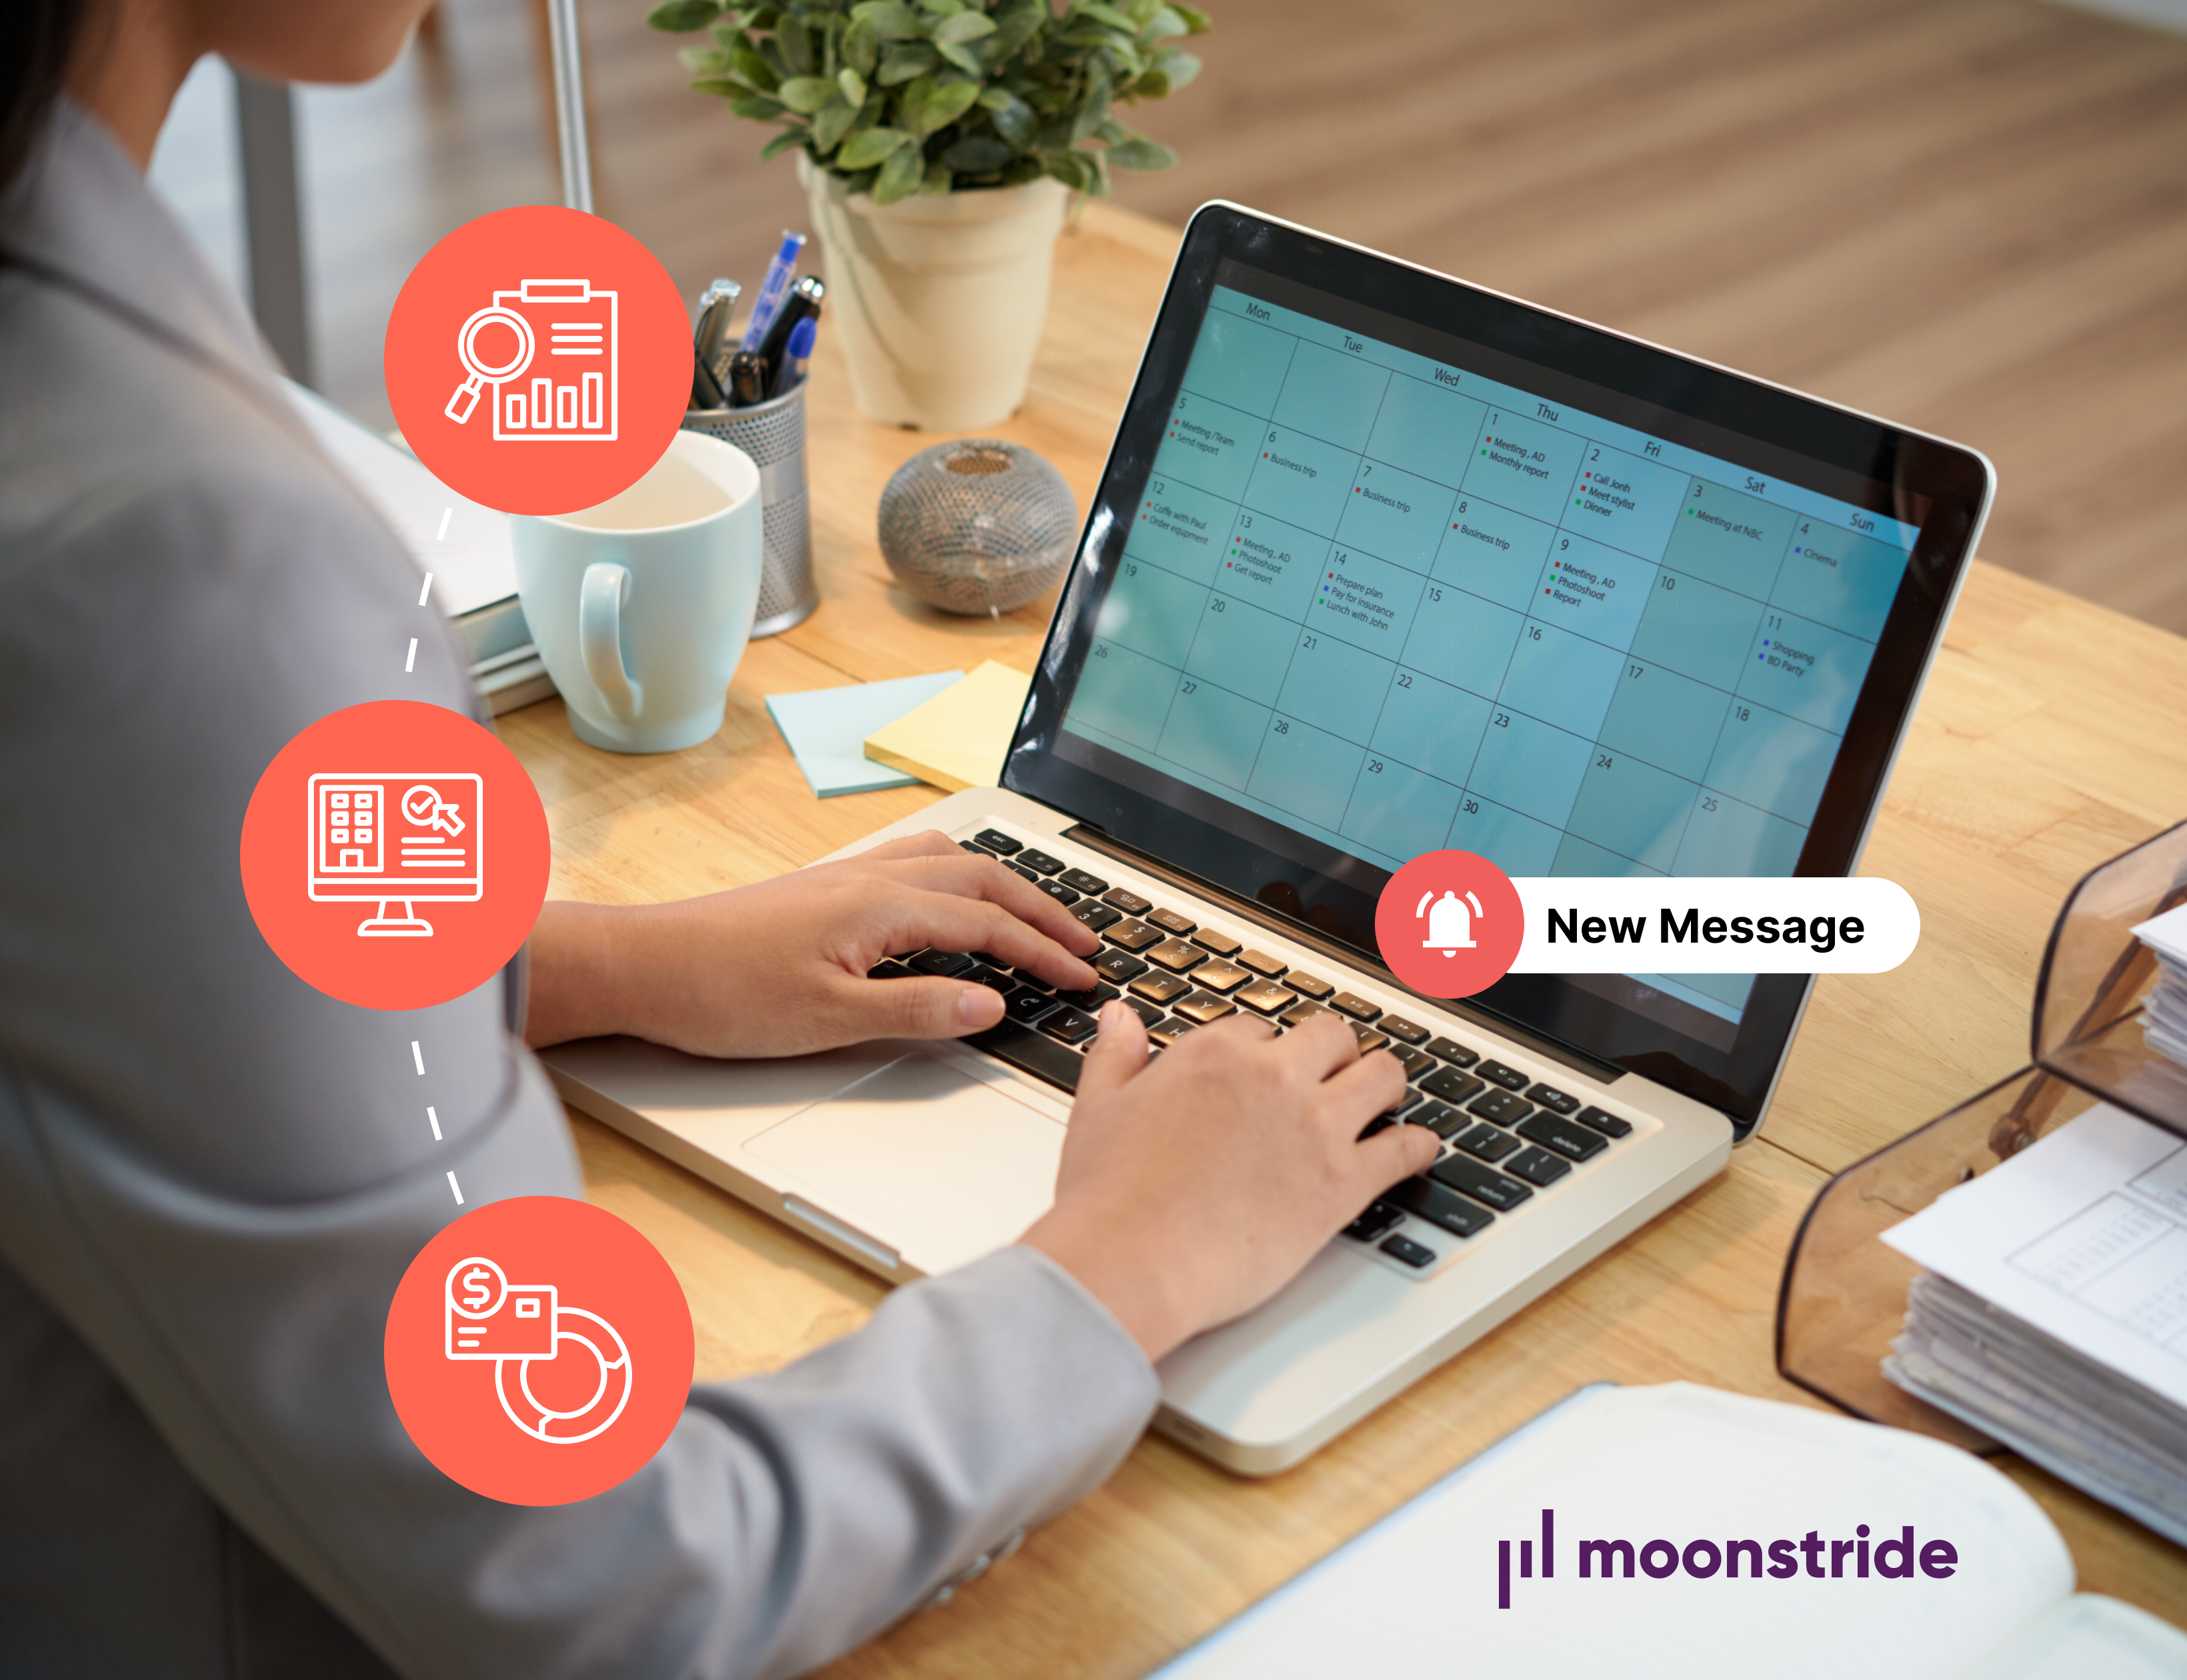 Optimising Booking Management Efficiency – How moonstride Can Streamline Travel Operations